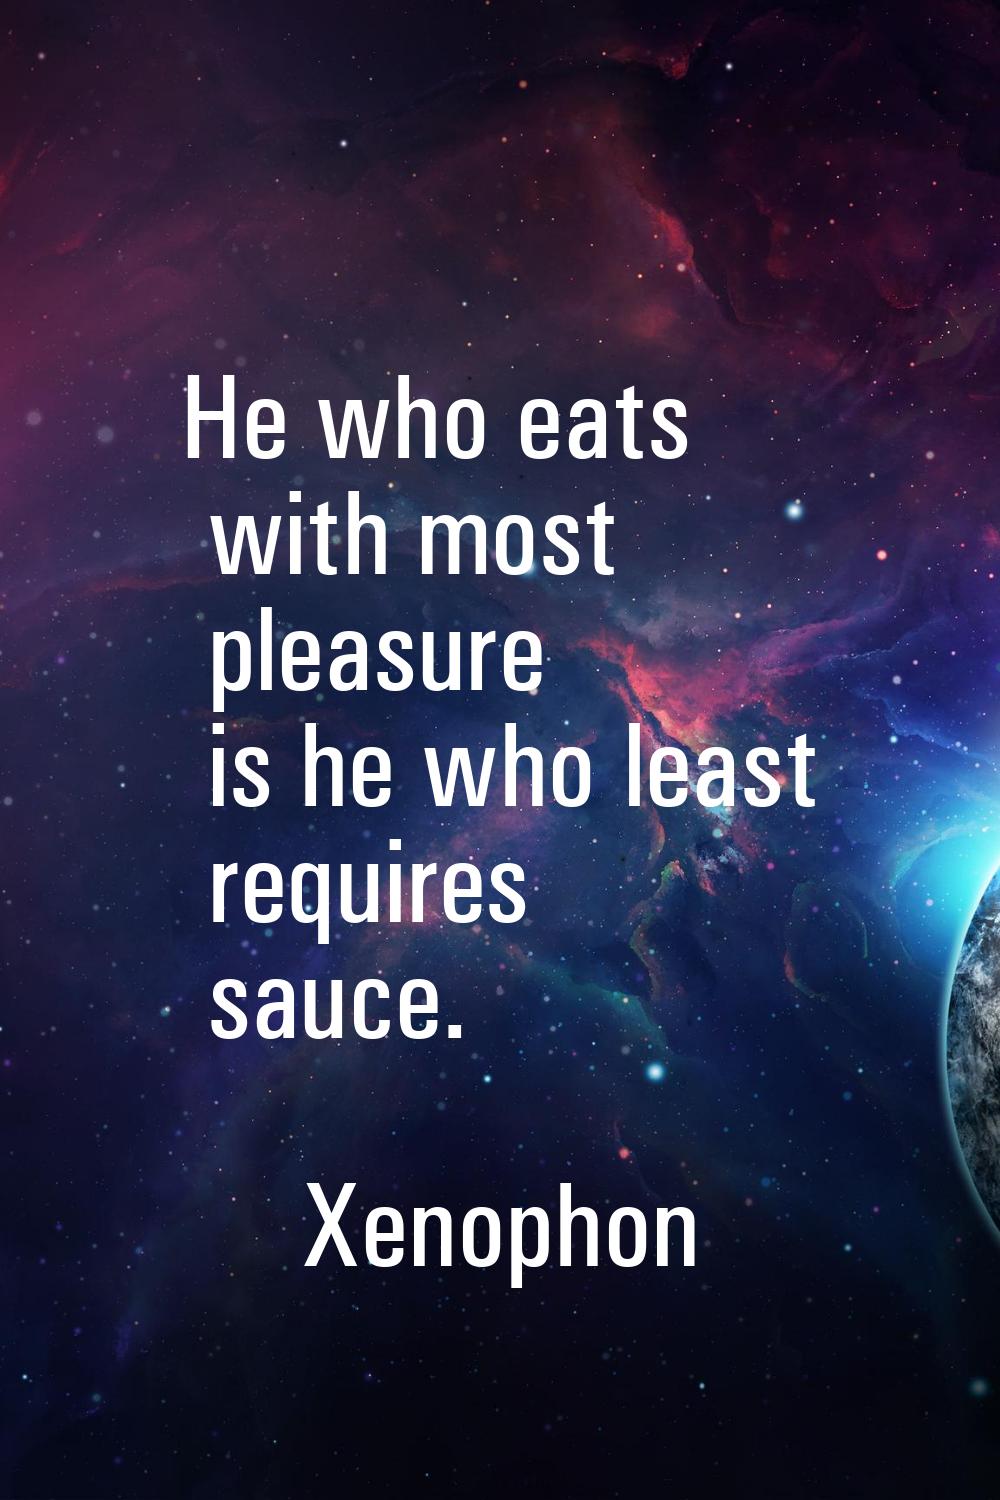 He who eats with most pleasure is he who least requires sauce.